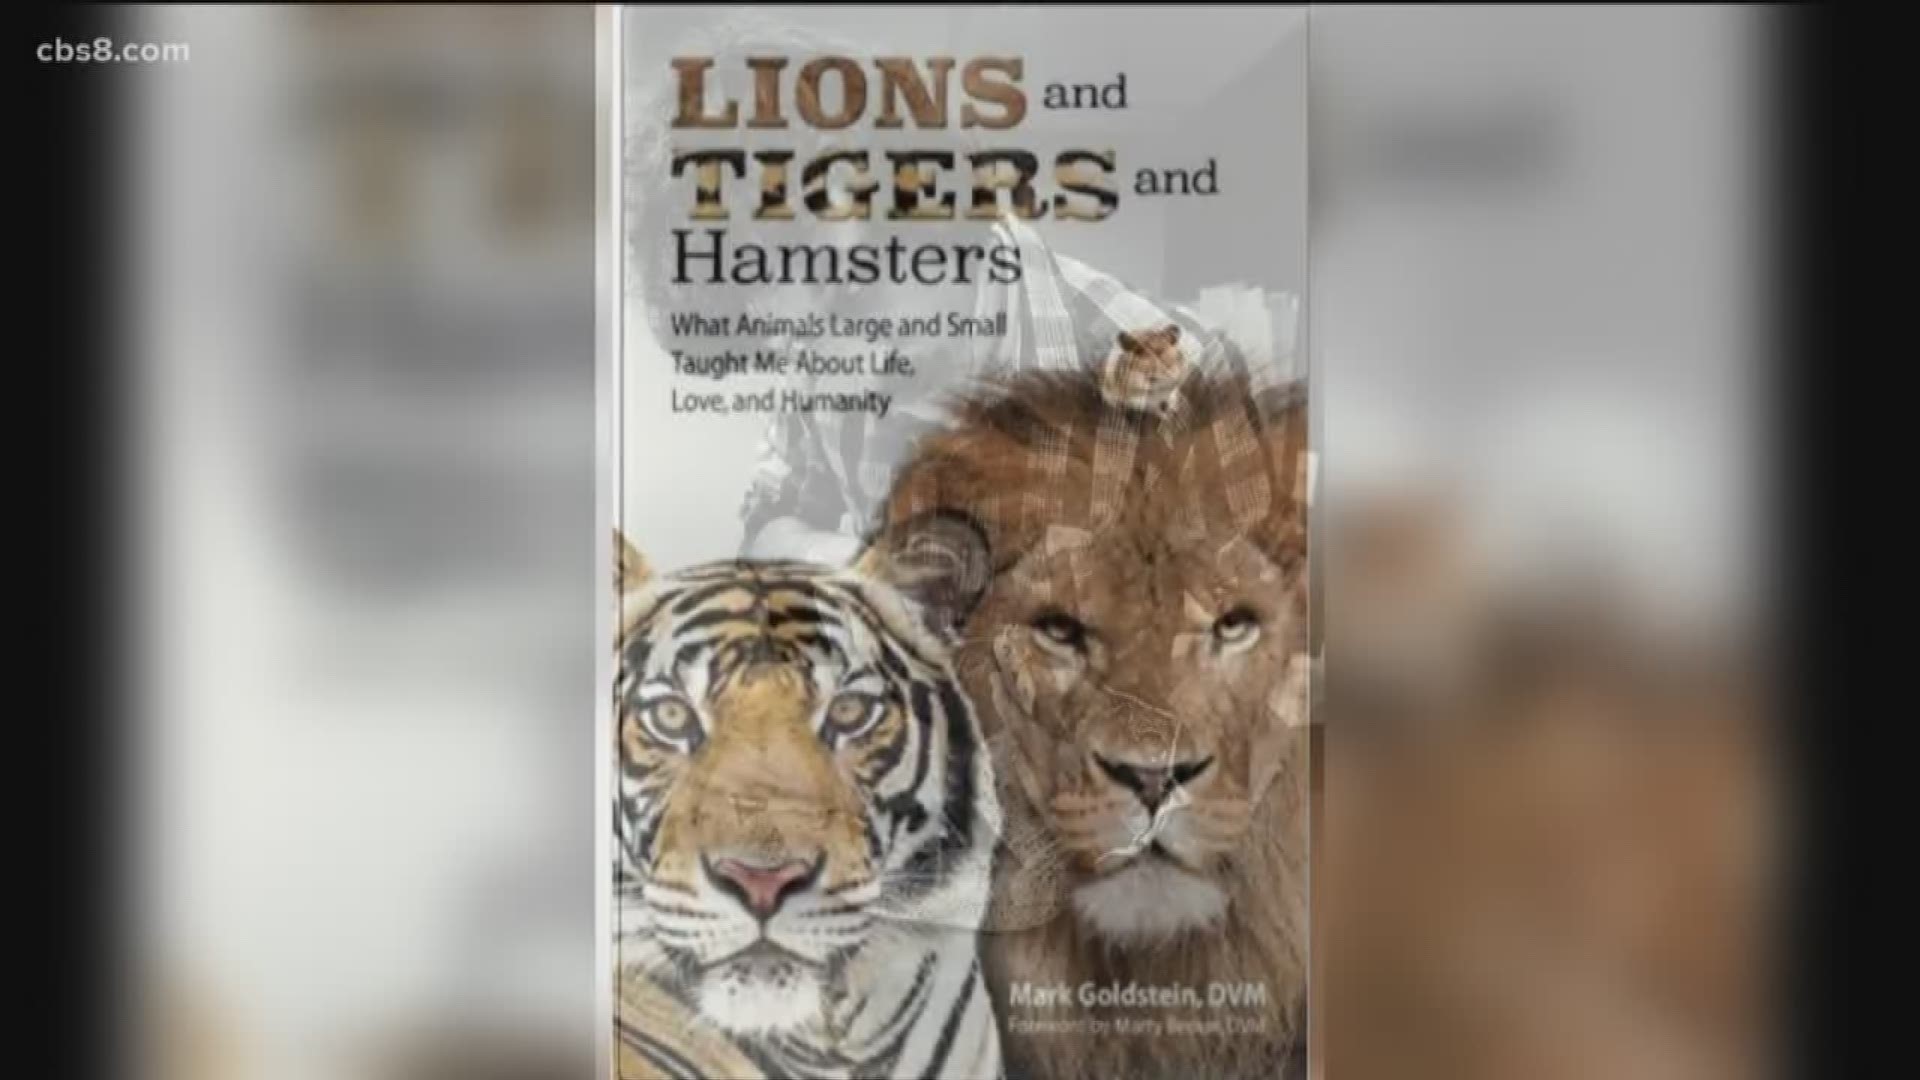 In his career that spans over 40 years, Goldstein has amassed some incredible stories, some of which he tells in his new book "Lions and Tigers and Hamsters: What Animals Large and Small Taught Me About Life, Love, and Humanity."